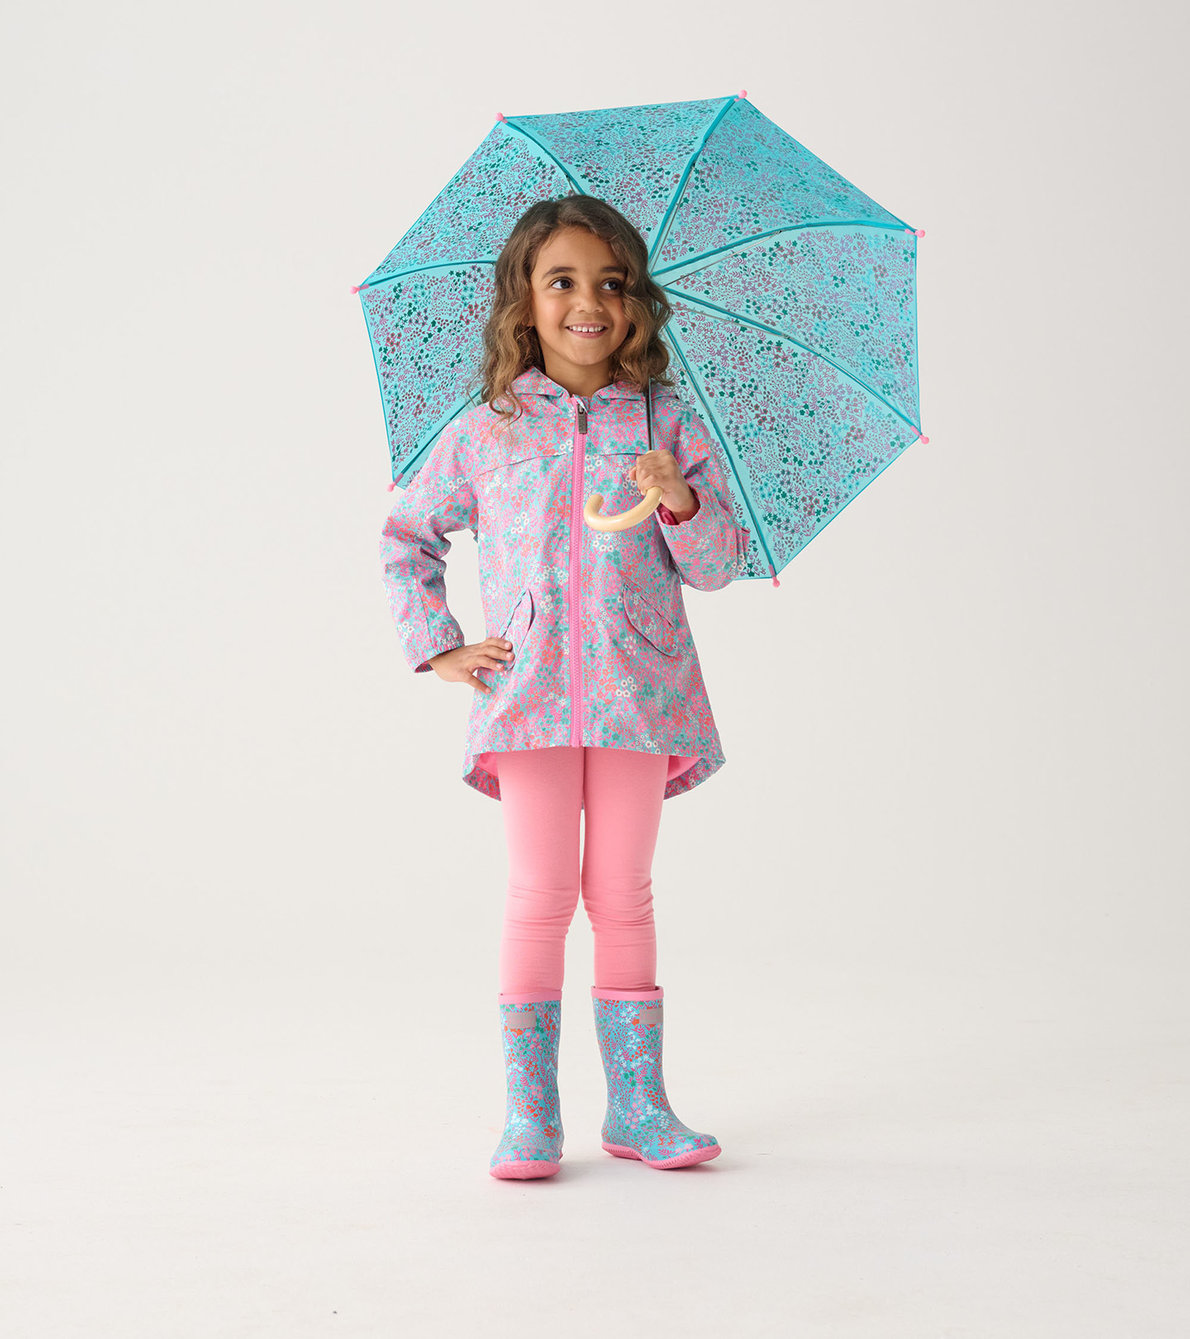 View larger image of Girls Ditsy Floral Zip-Up Lightweight Raincoat